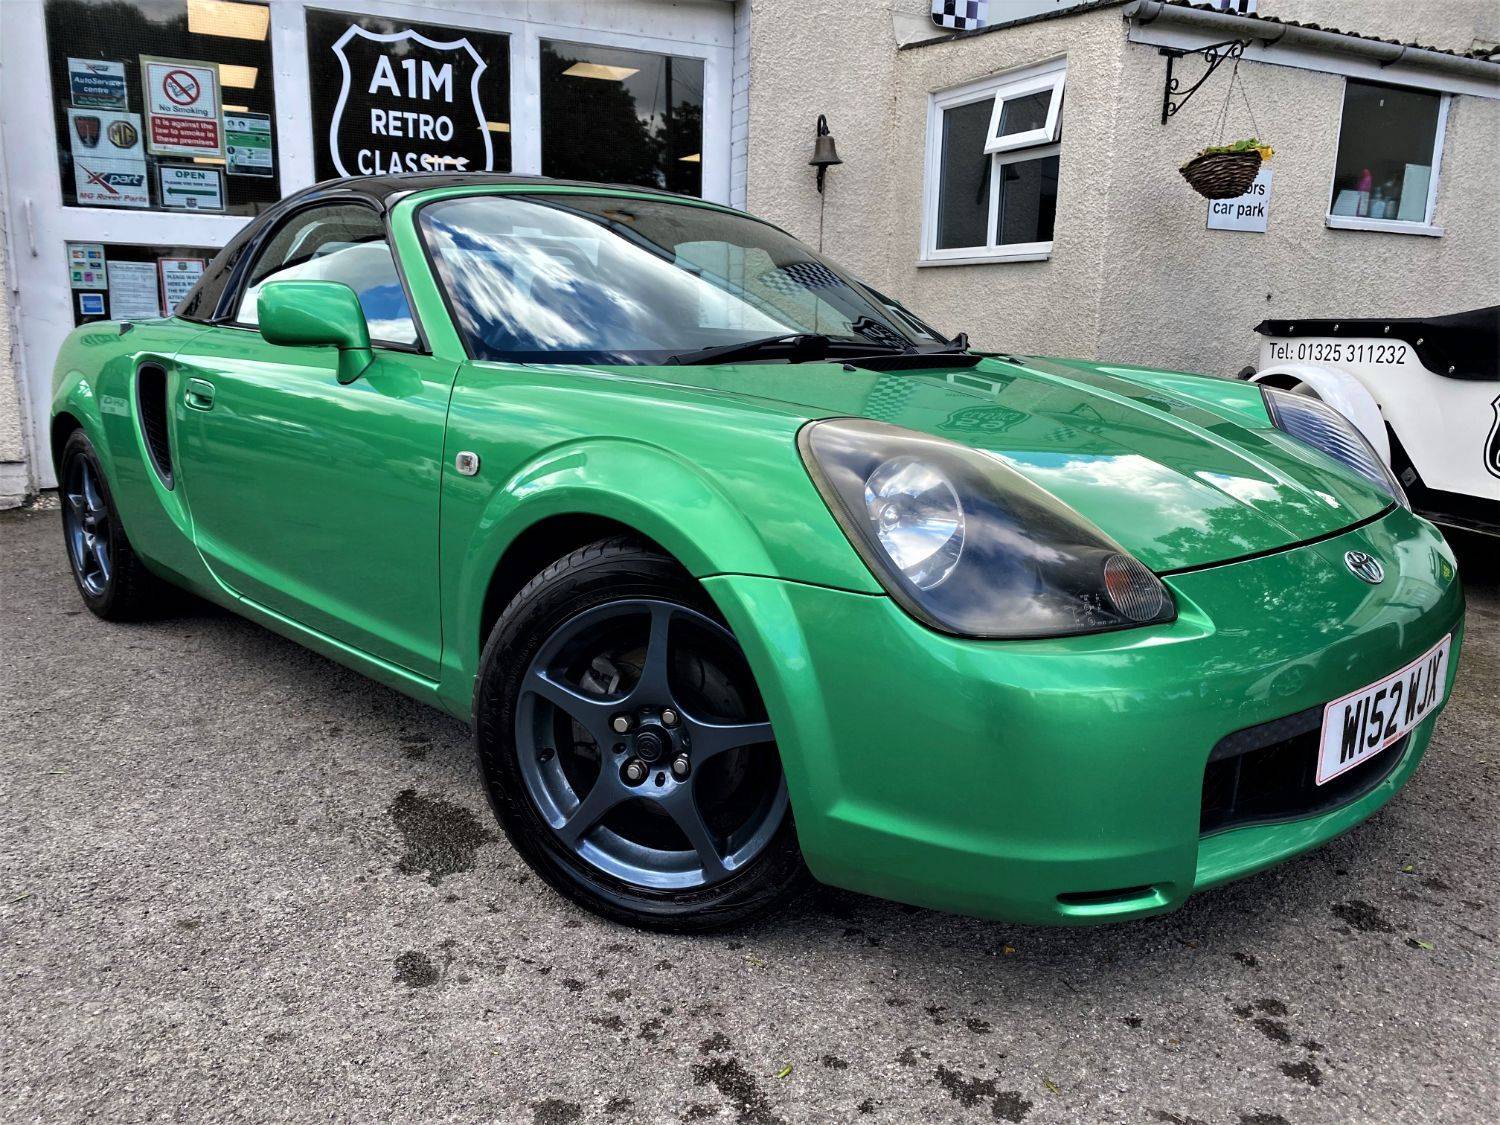 For Sale: Toyota MR2 (2000) offered for GBP 2,995